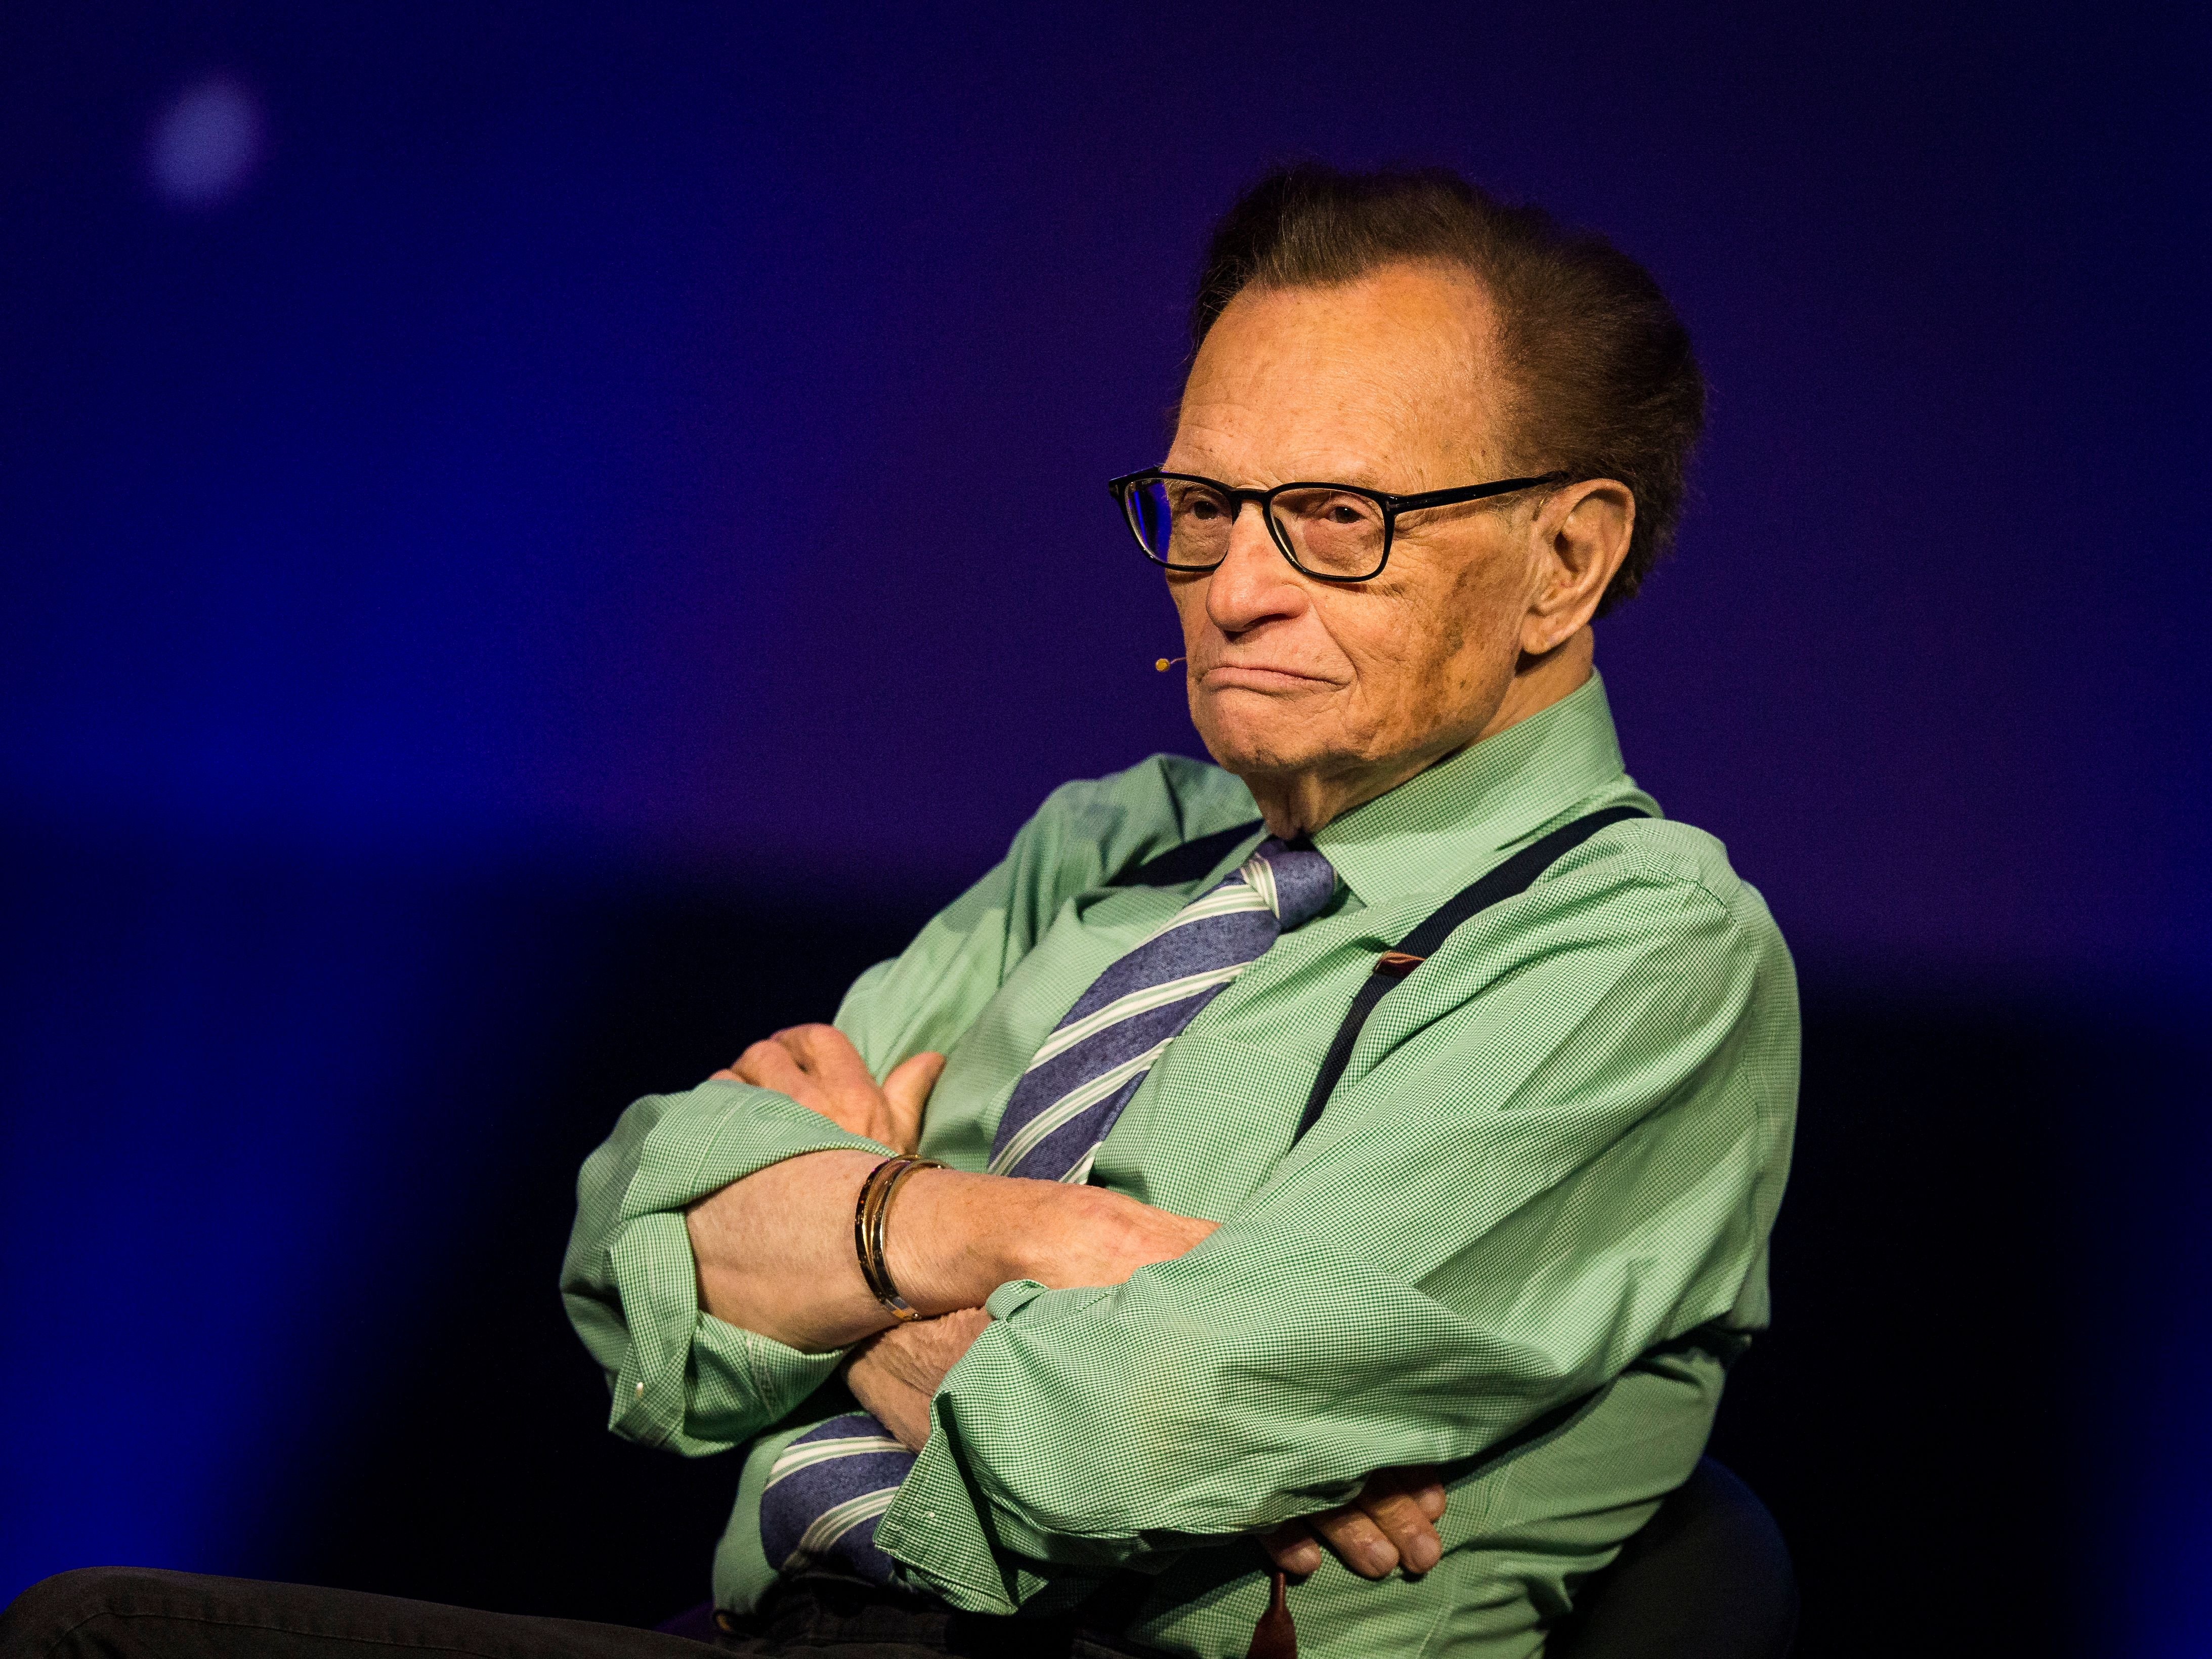 Larry King attending the Starmus Festival Trondheim, Norway | Photo: Getty Images